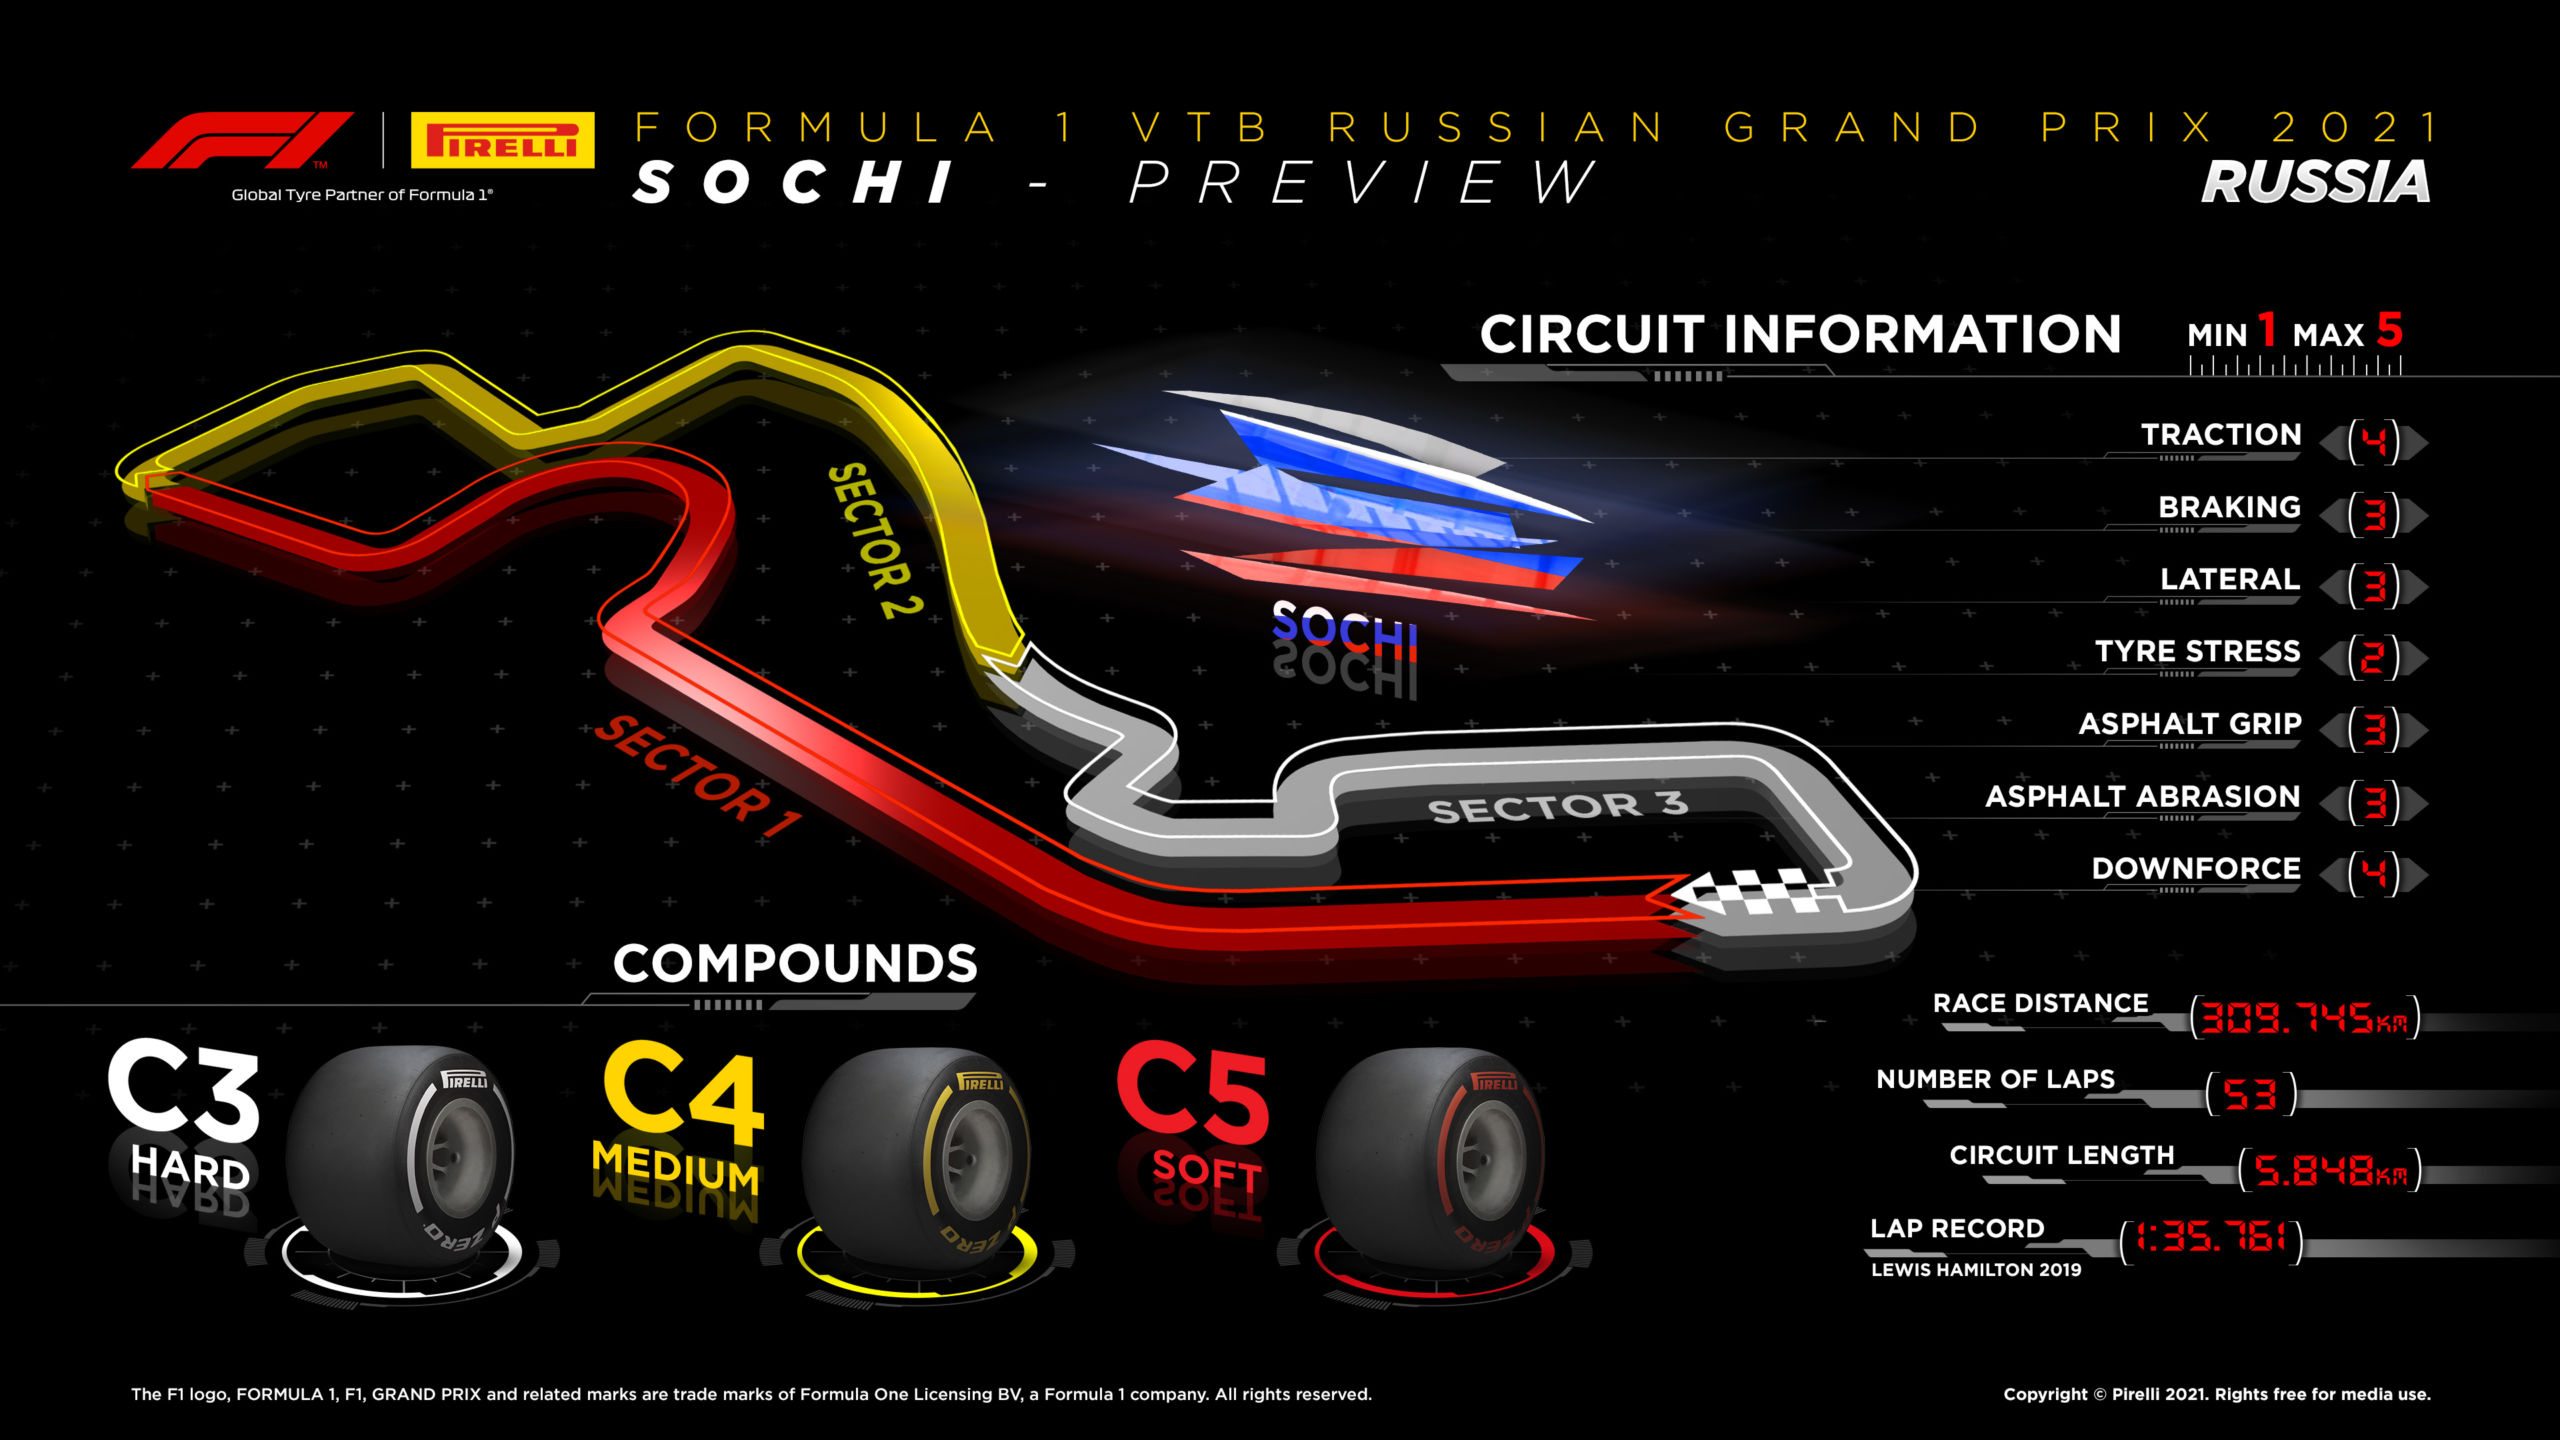 2021 Russian Grand Prix Tyre Compounds